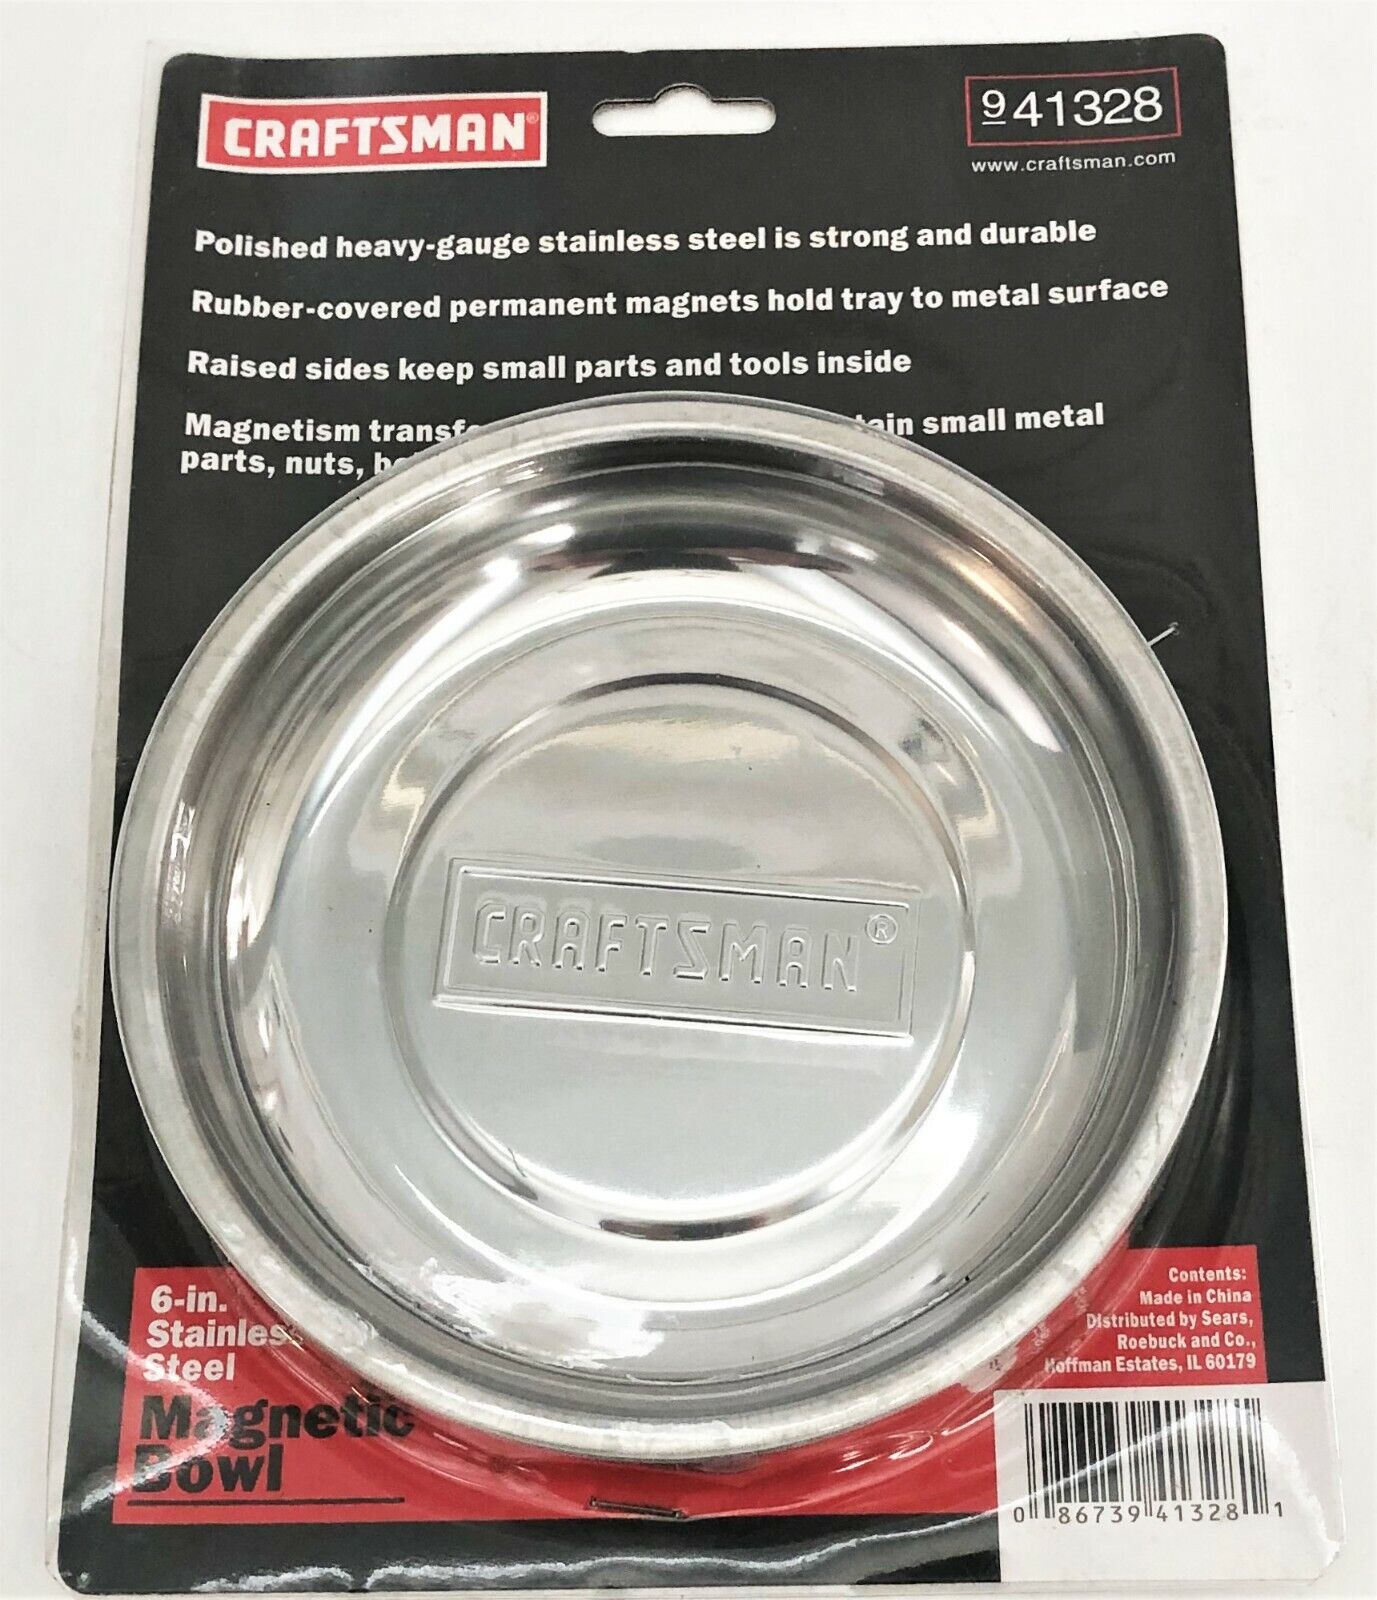 CRAFTSMAN 6" ROUND HEAVY GAUGE STAINLESS STEEL MAGNETIC PARTS TRAY DISH 941328